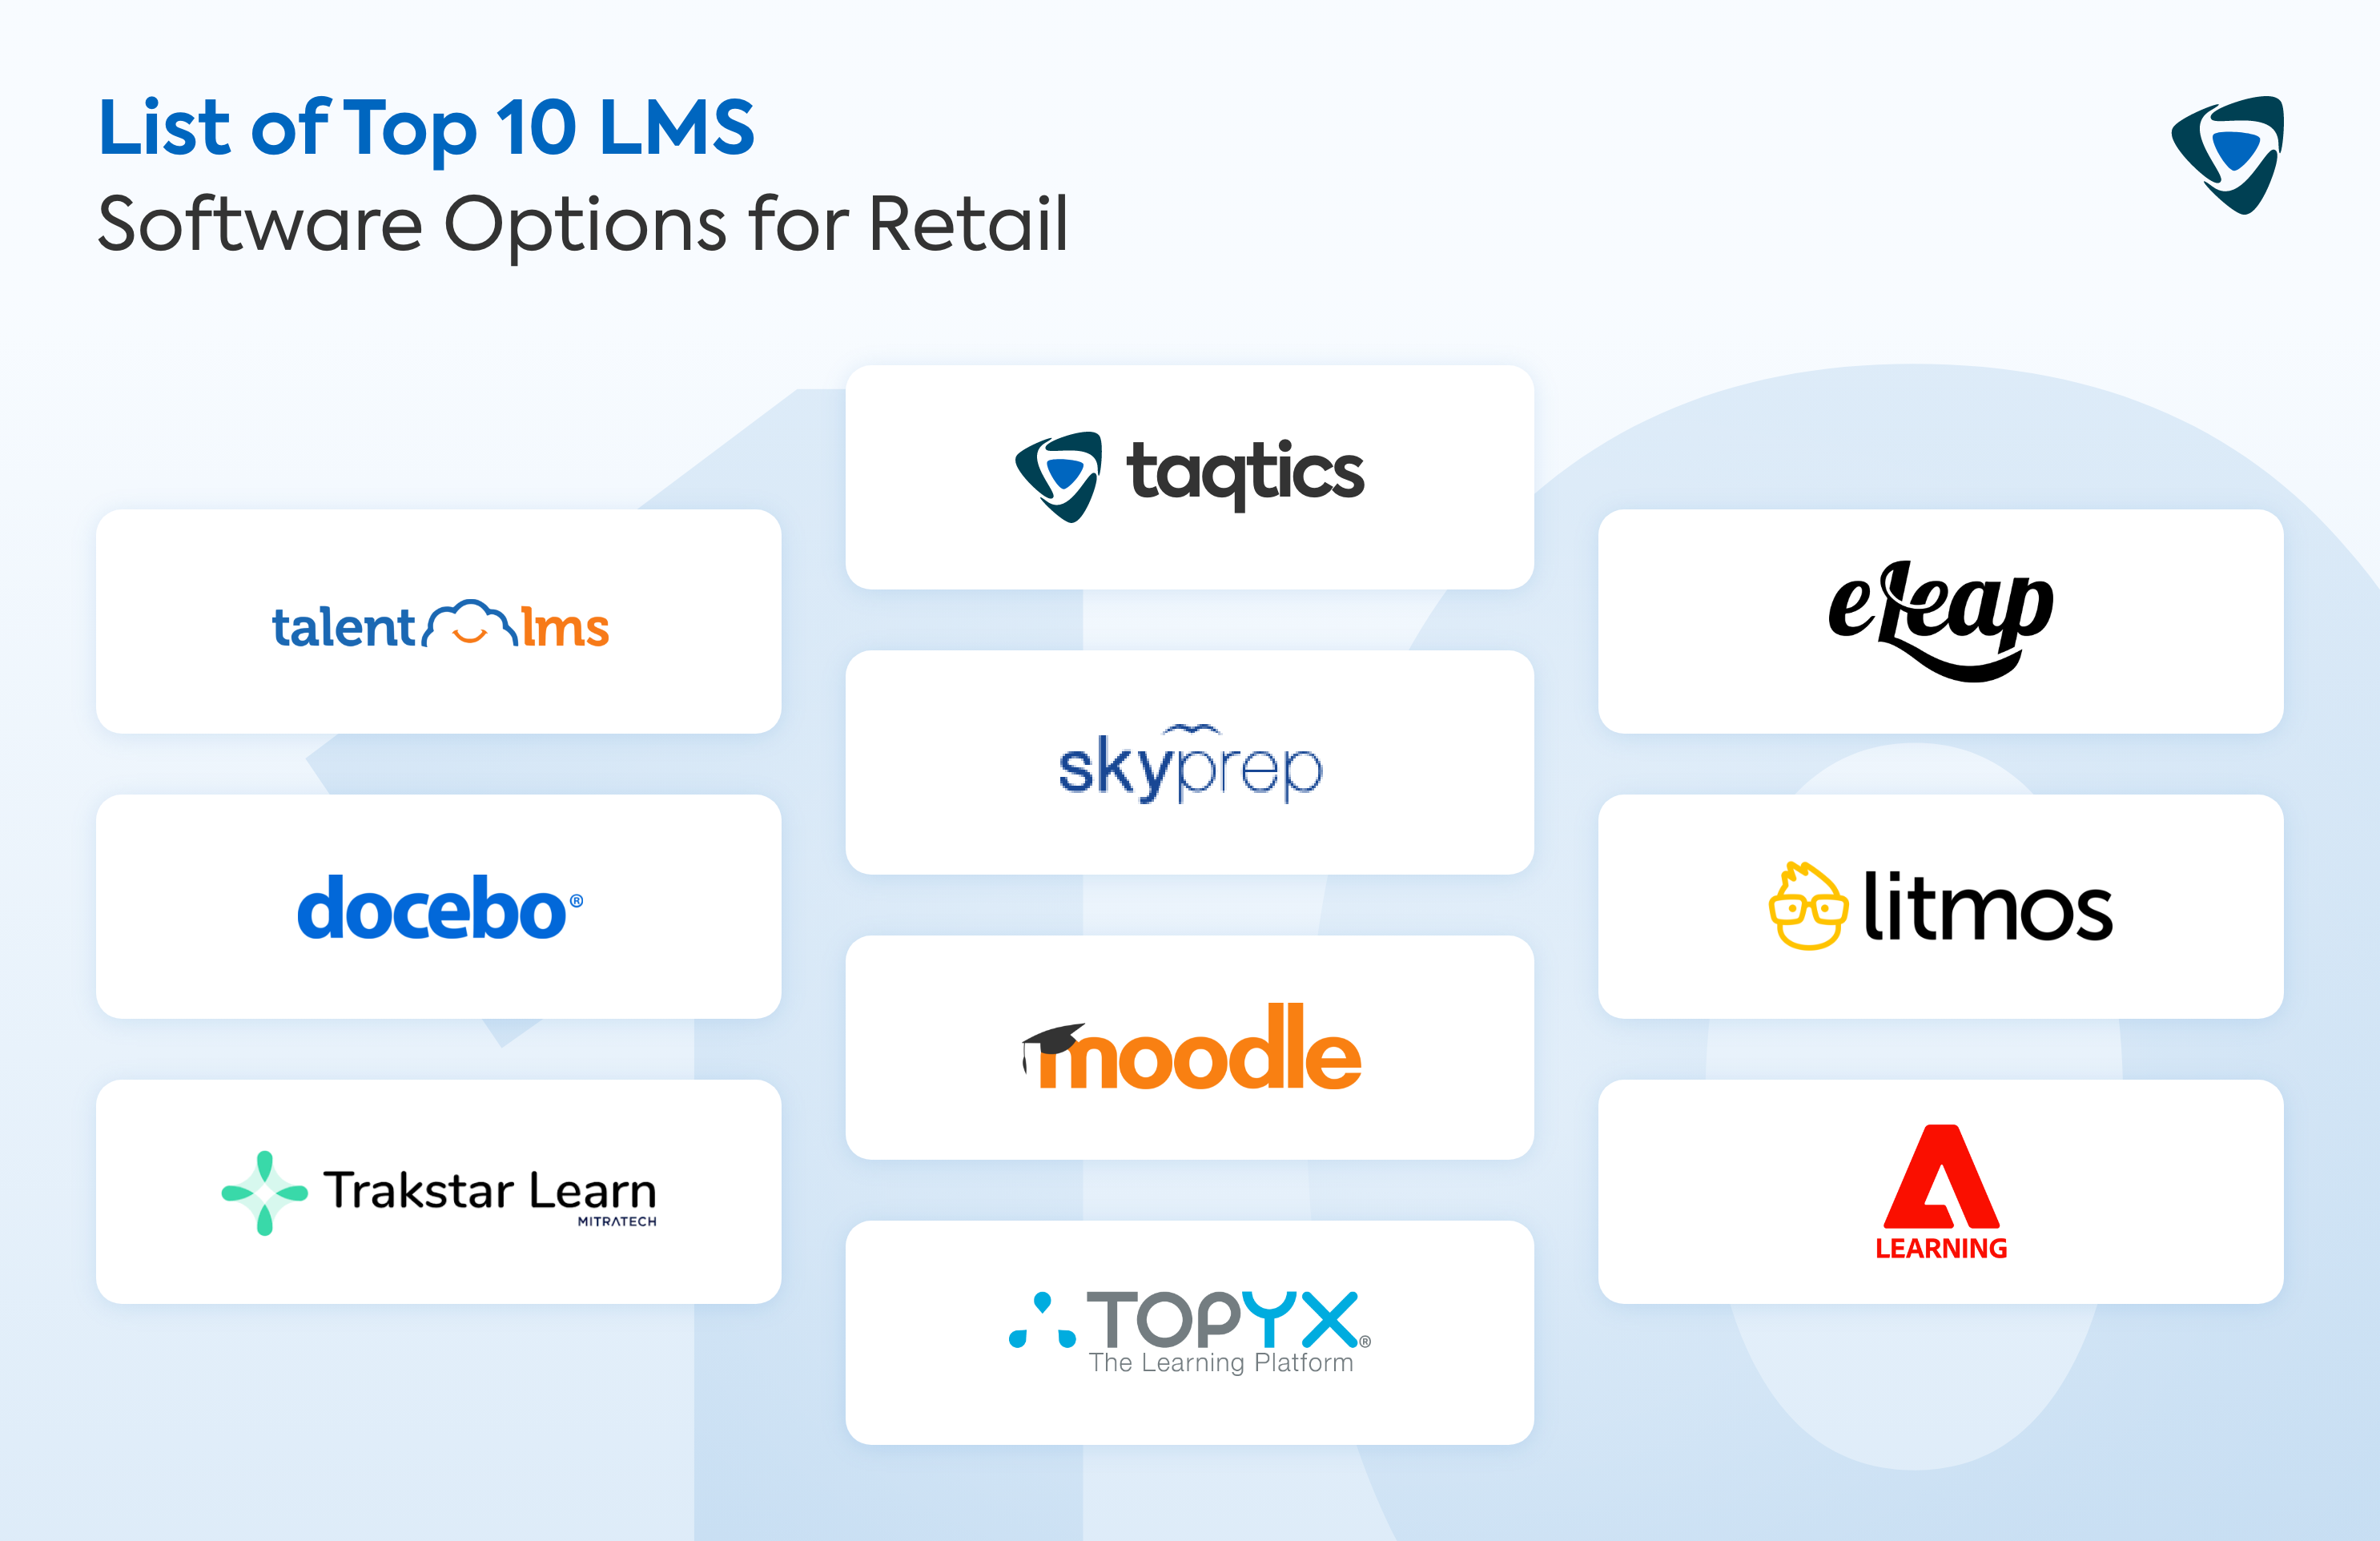 List of Top 10 LMS Software Options for Retail